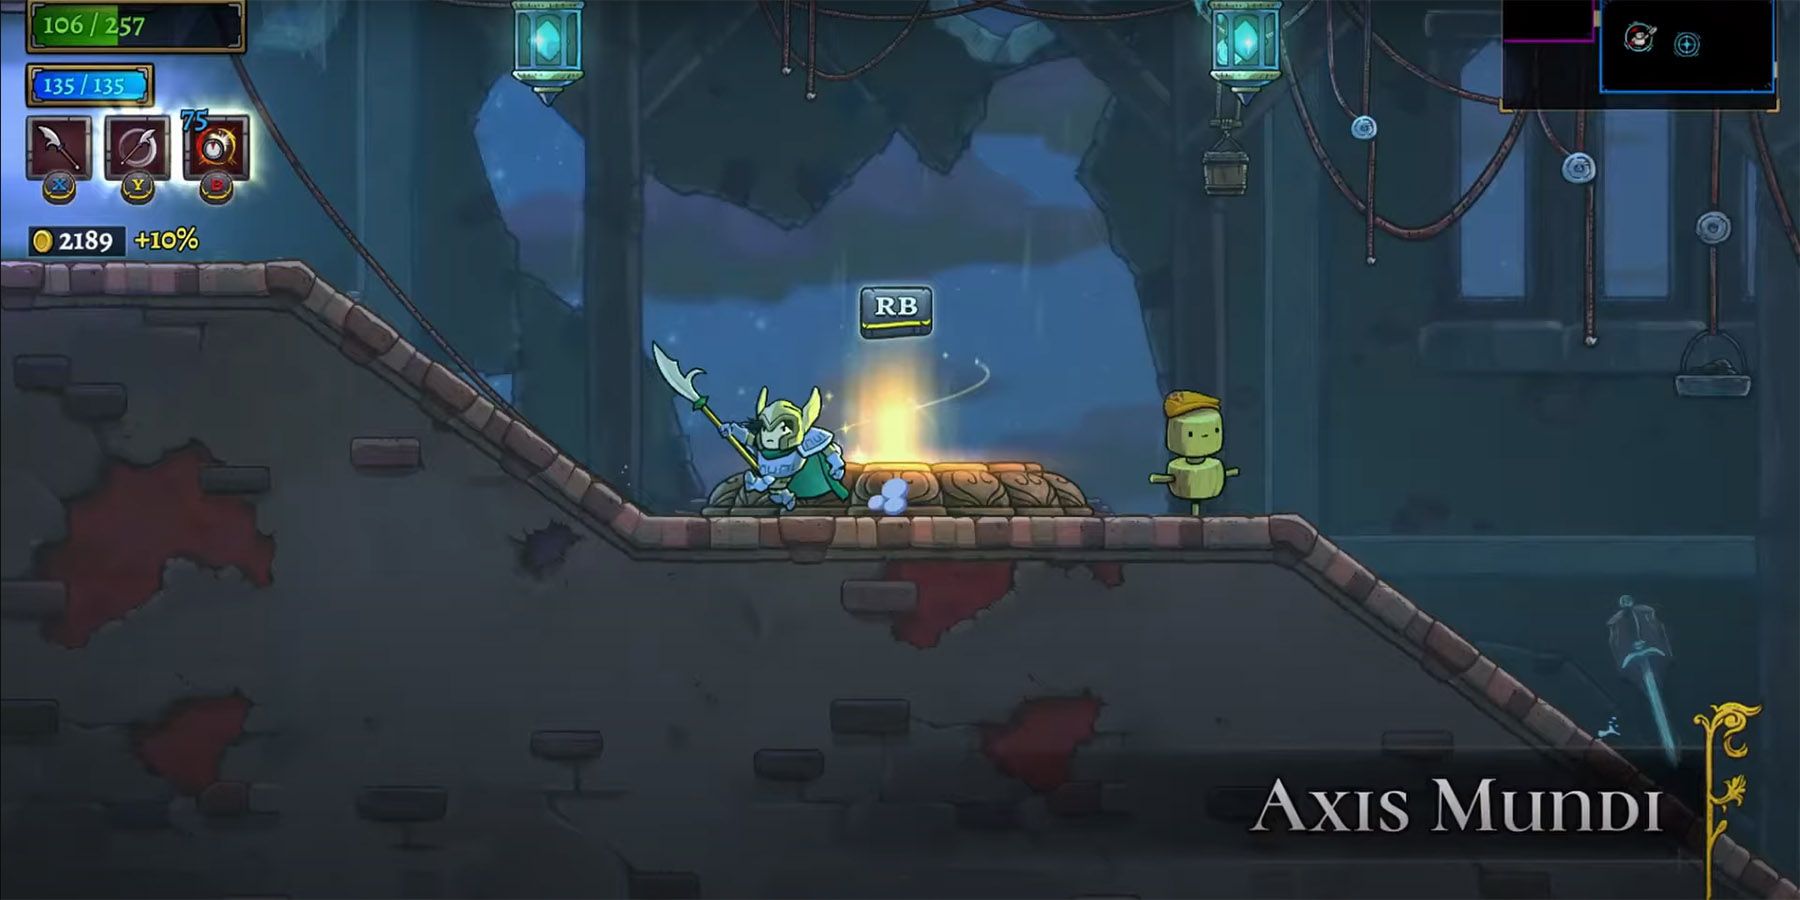 image showing axis mundi entrance in rogue legacy 2.